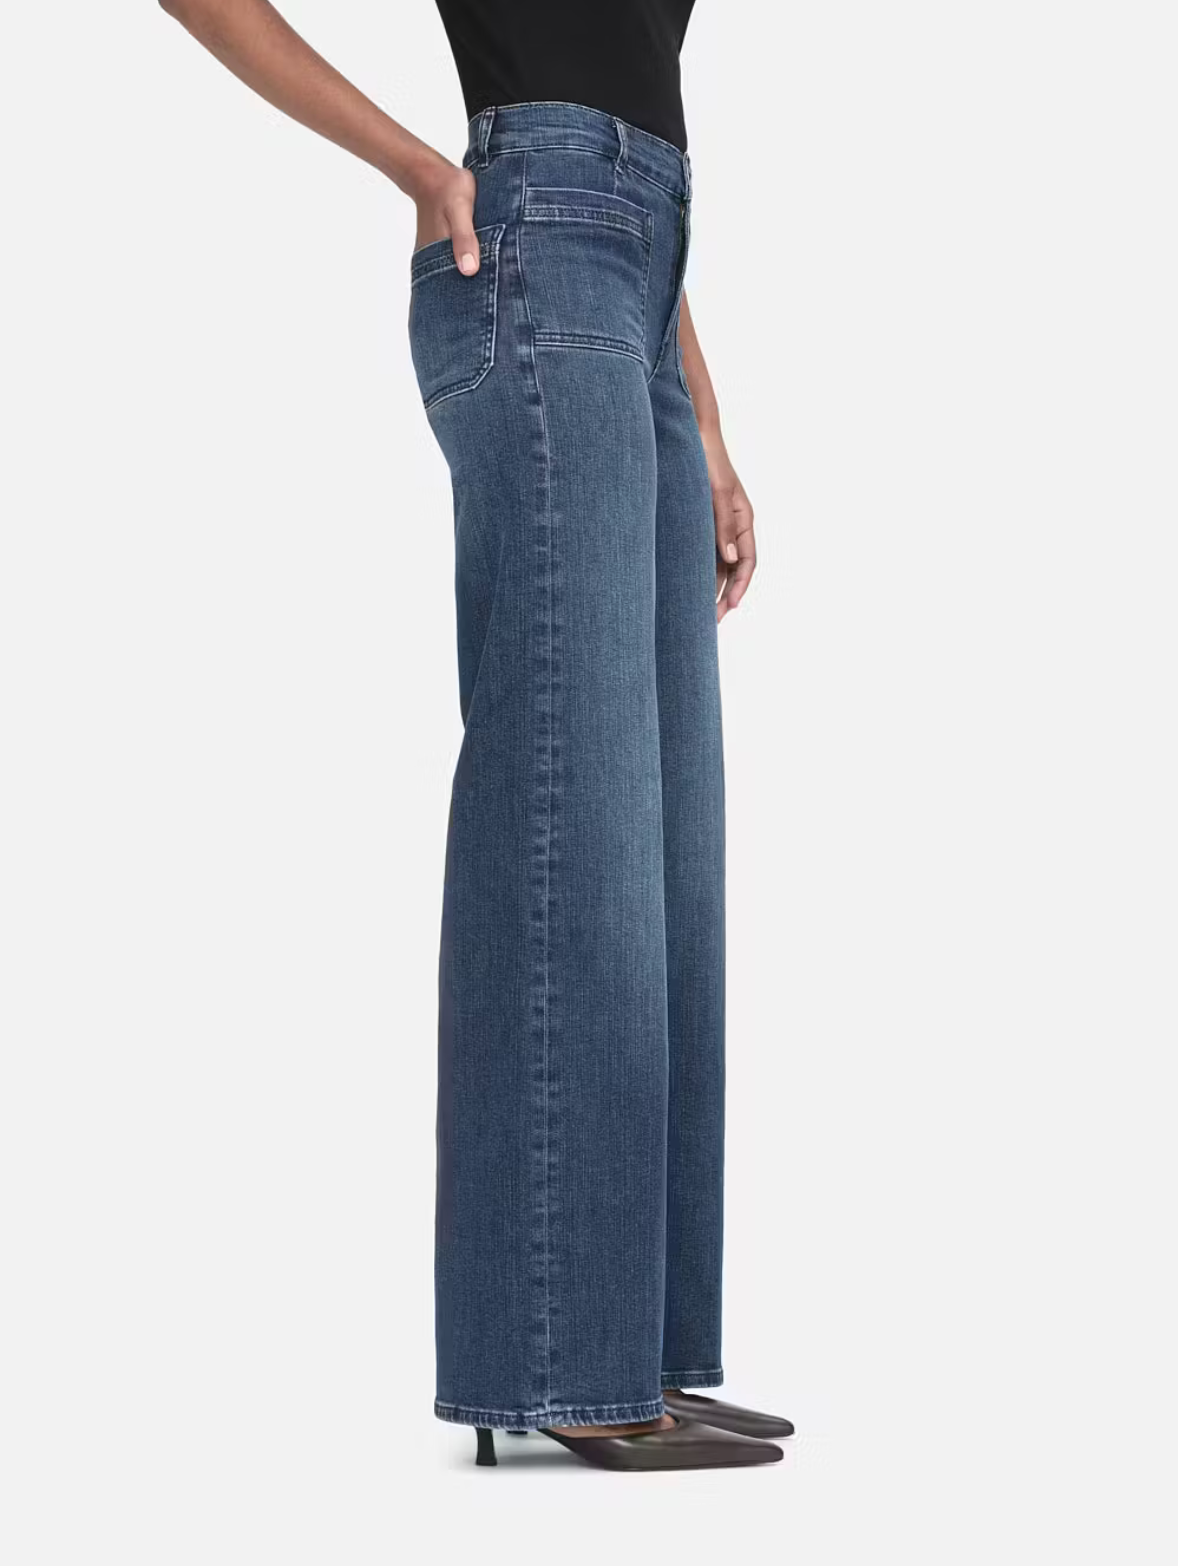 Model wears wide leg jeans in a dark wash. Features front pockets. Side view.